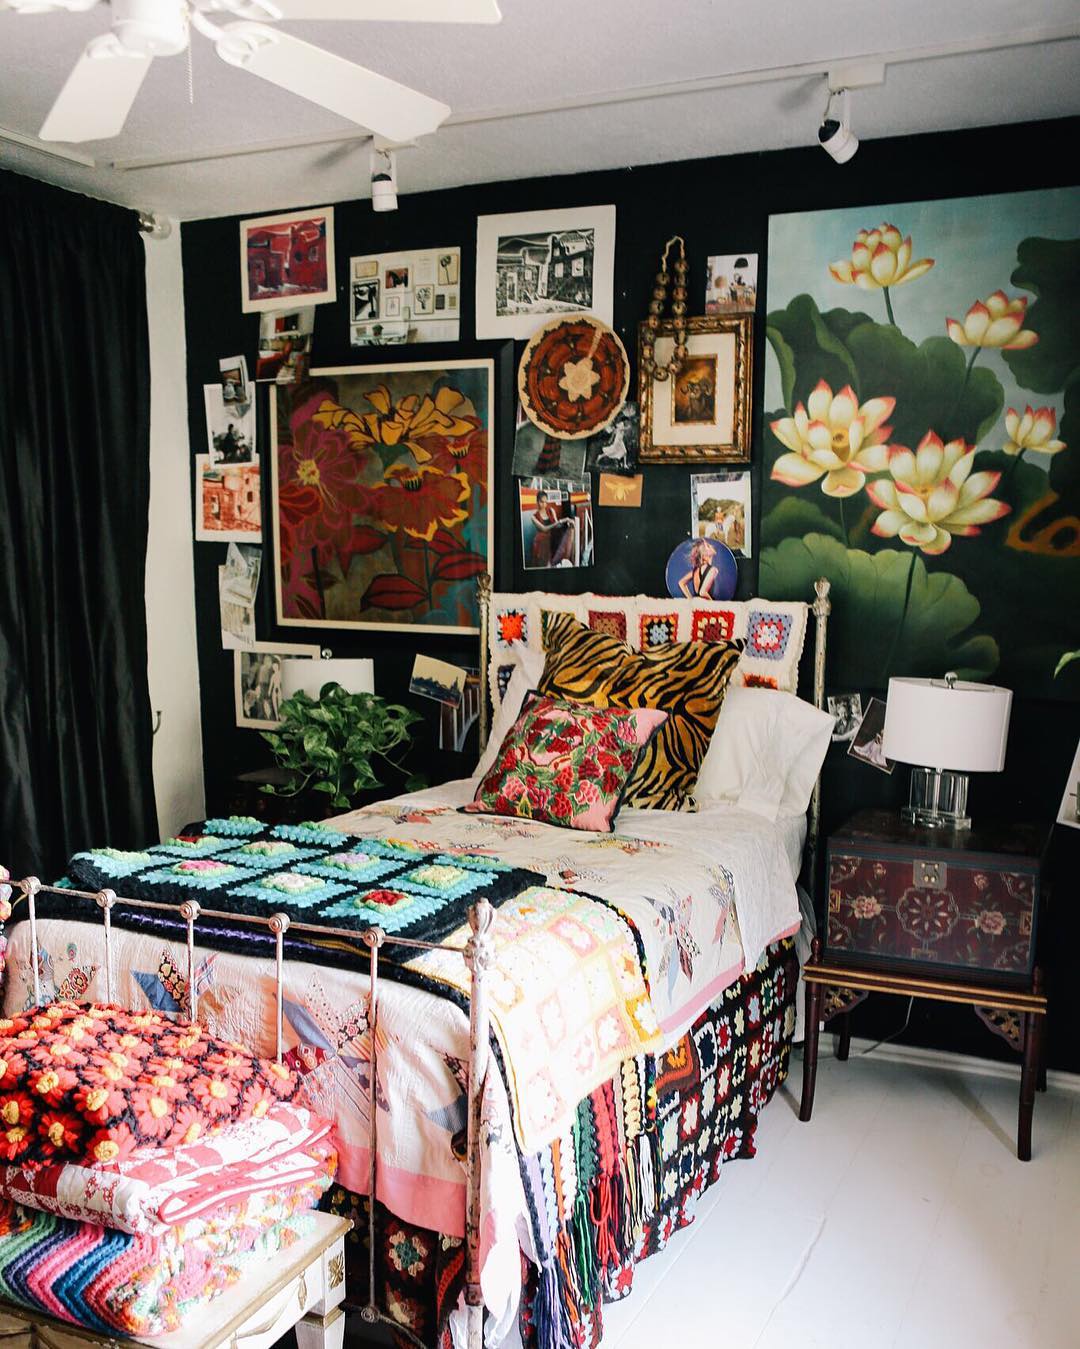 Maximalist Interior Design:How To Do It In The Right Way?